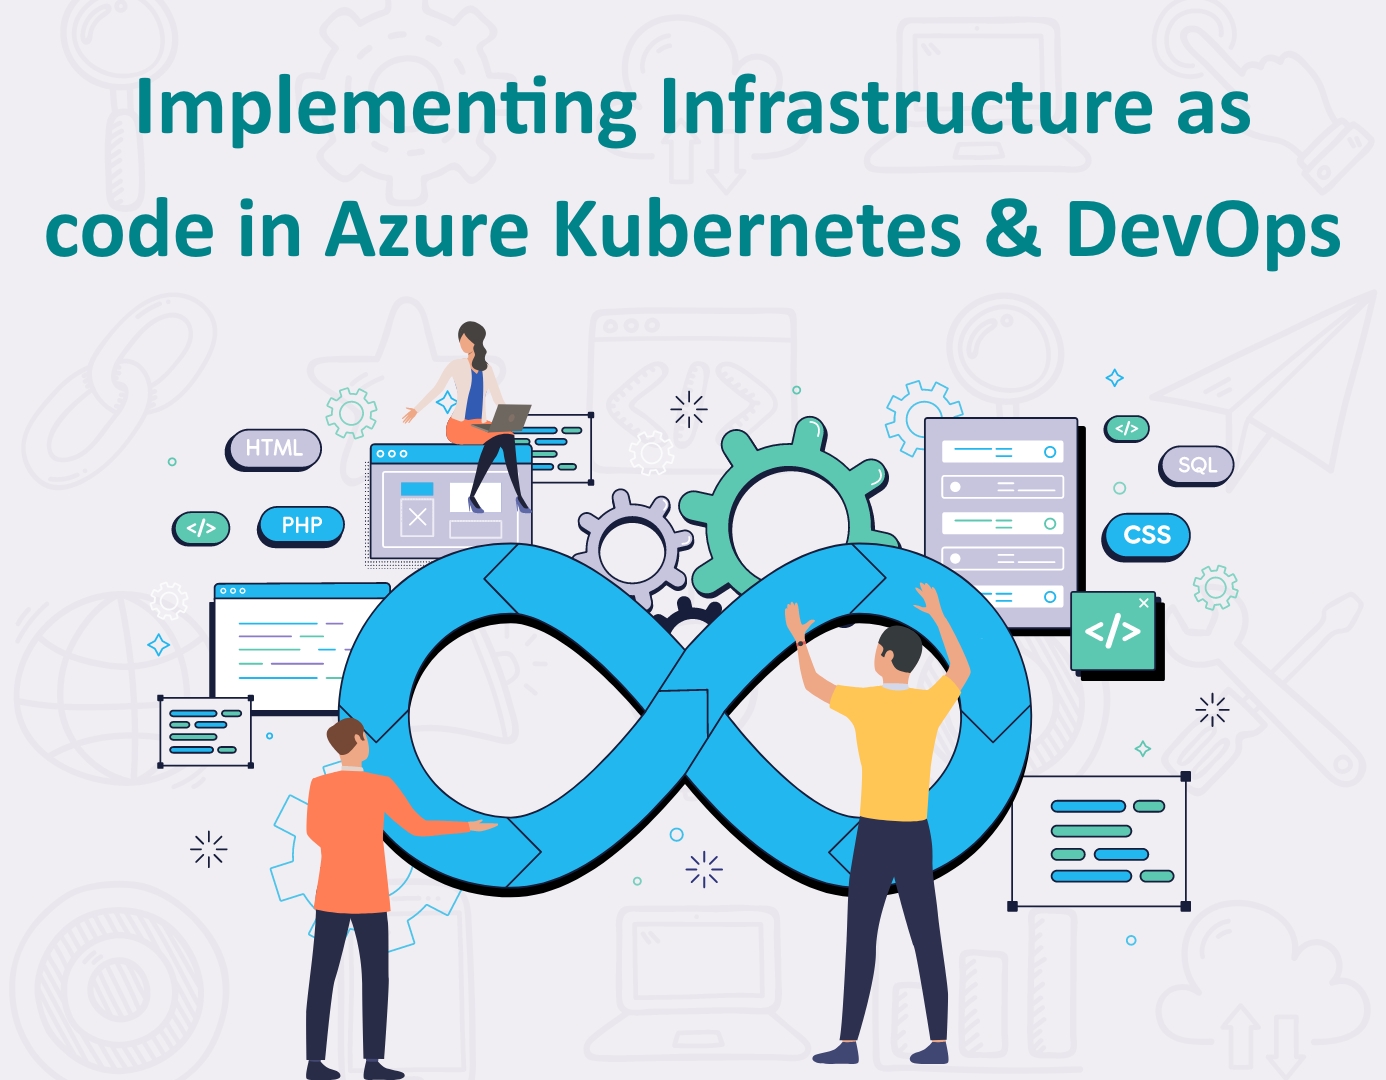 Implementing Infrastructure as code in Azure Kubernetes & DevOps